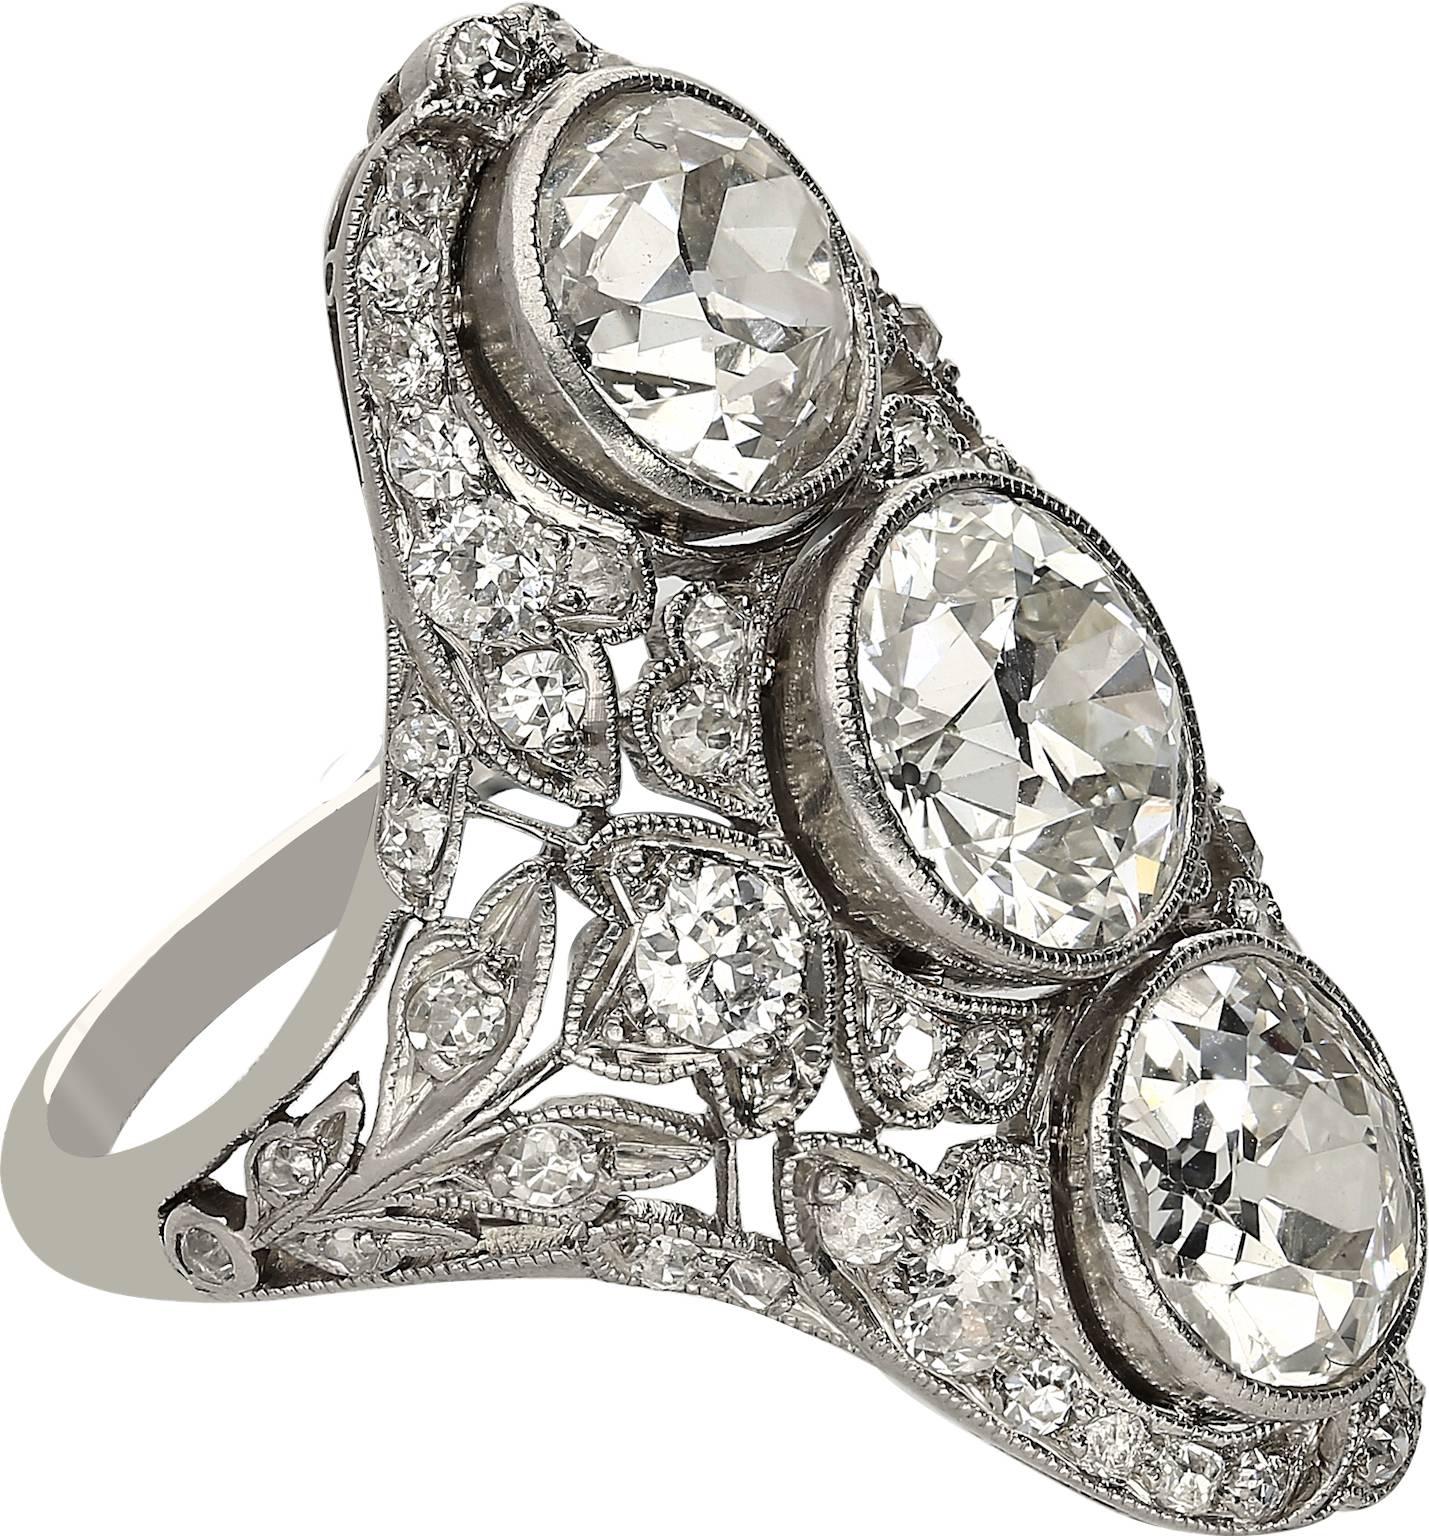 Art Deco Ring with stunning craftsmanship that helped define the era. 

